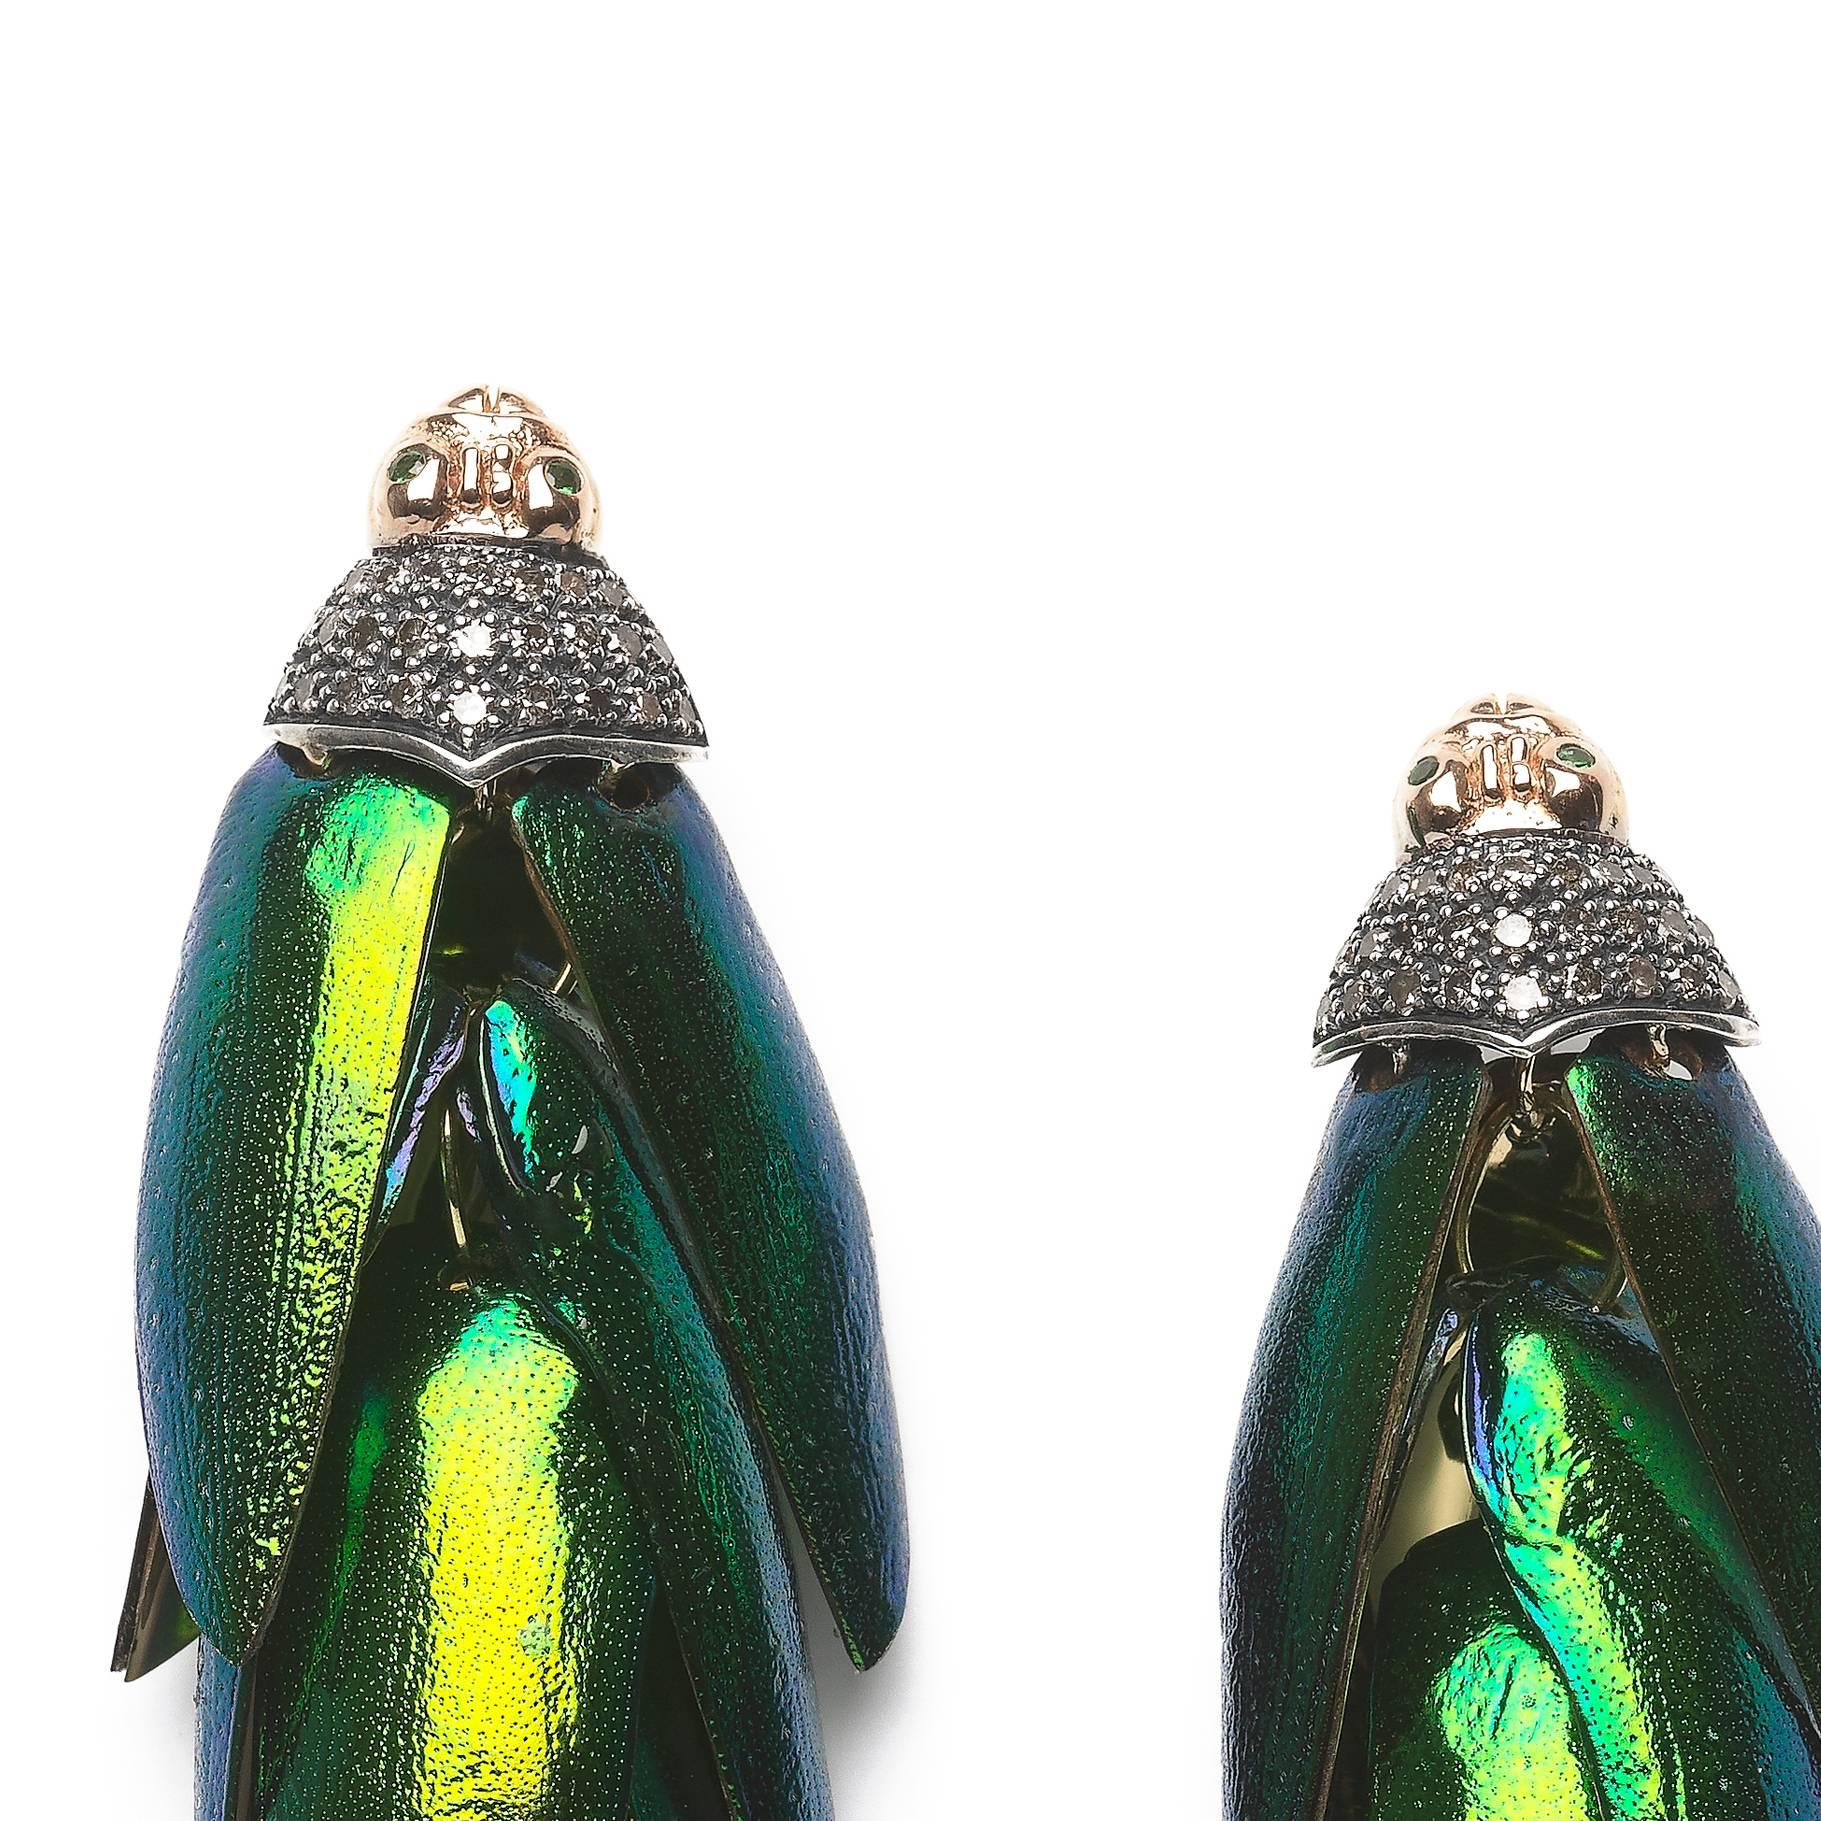 Around 40 real scarab wings are individually set on these drop earrings, and gently move with the wearer as they sit on the lobe. The earrings are designed in 18k yellow gold and sterling silver, with the scarabs’ heads at the posts embellished with